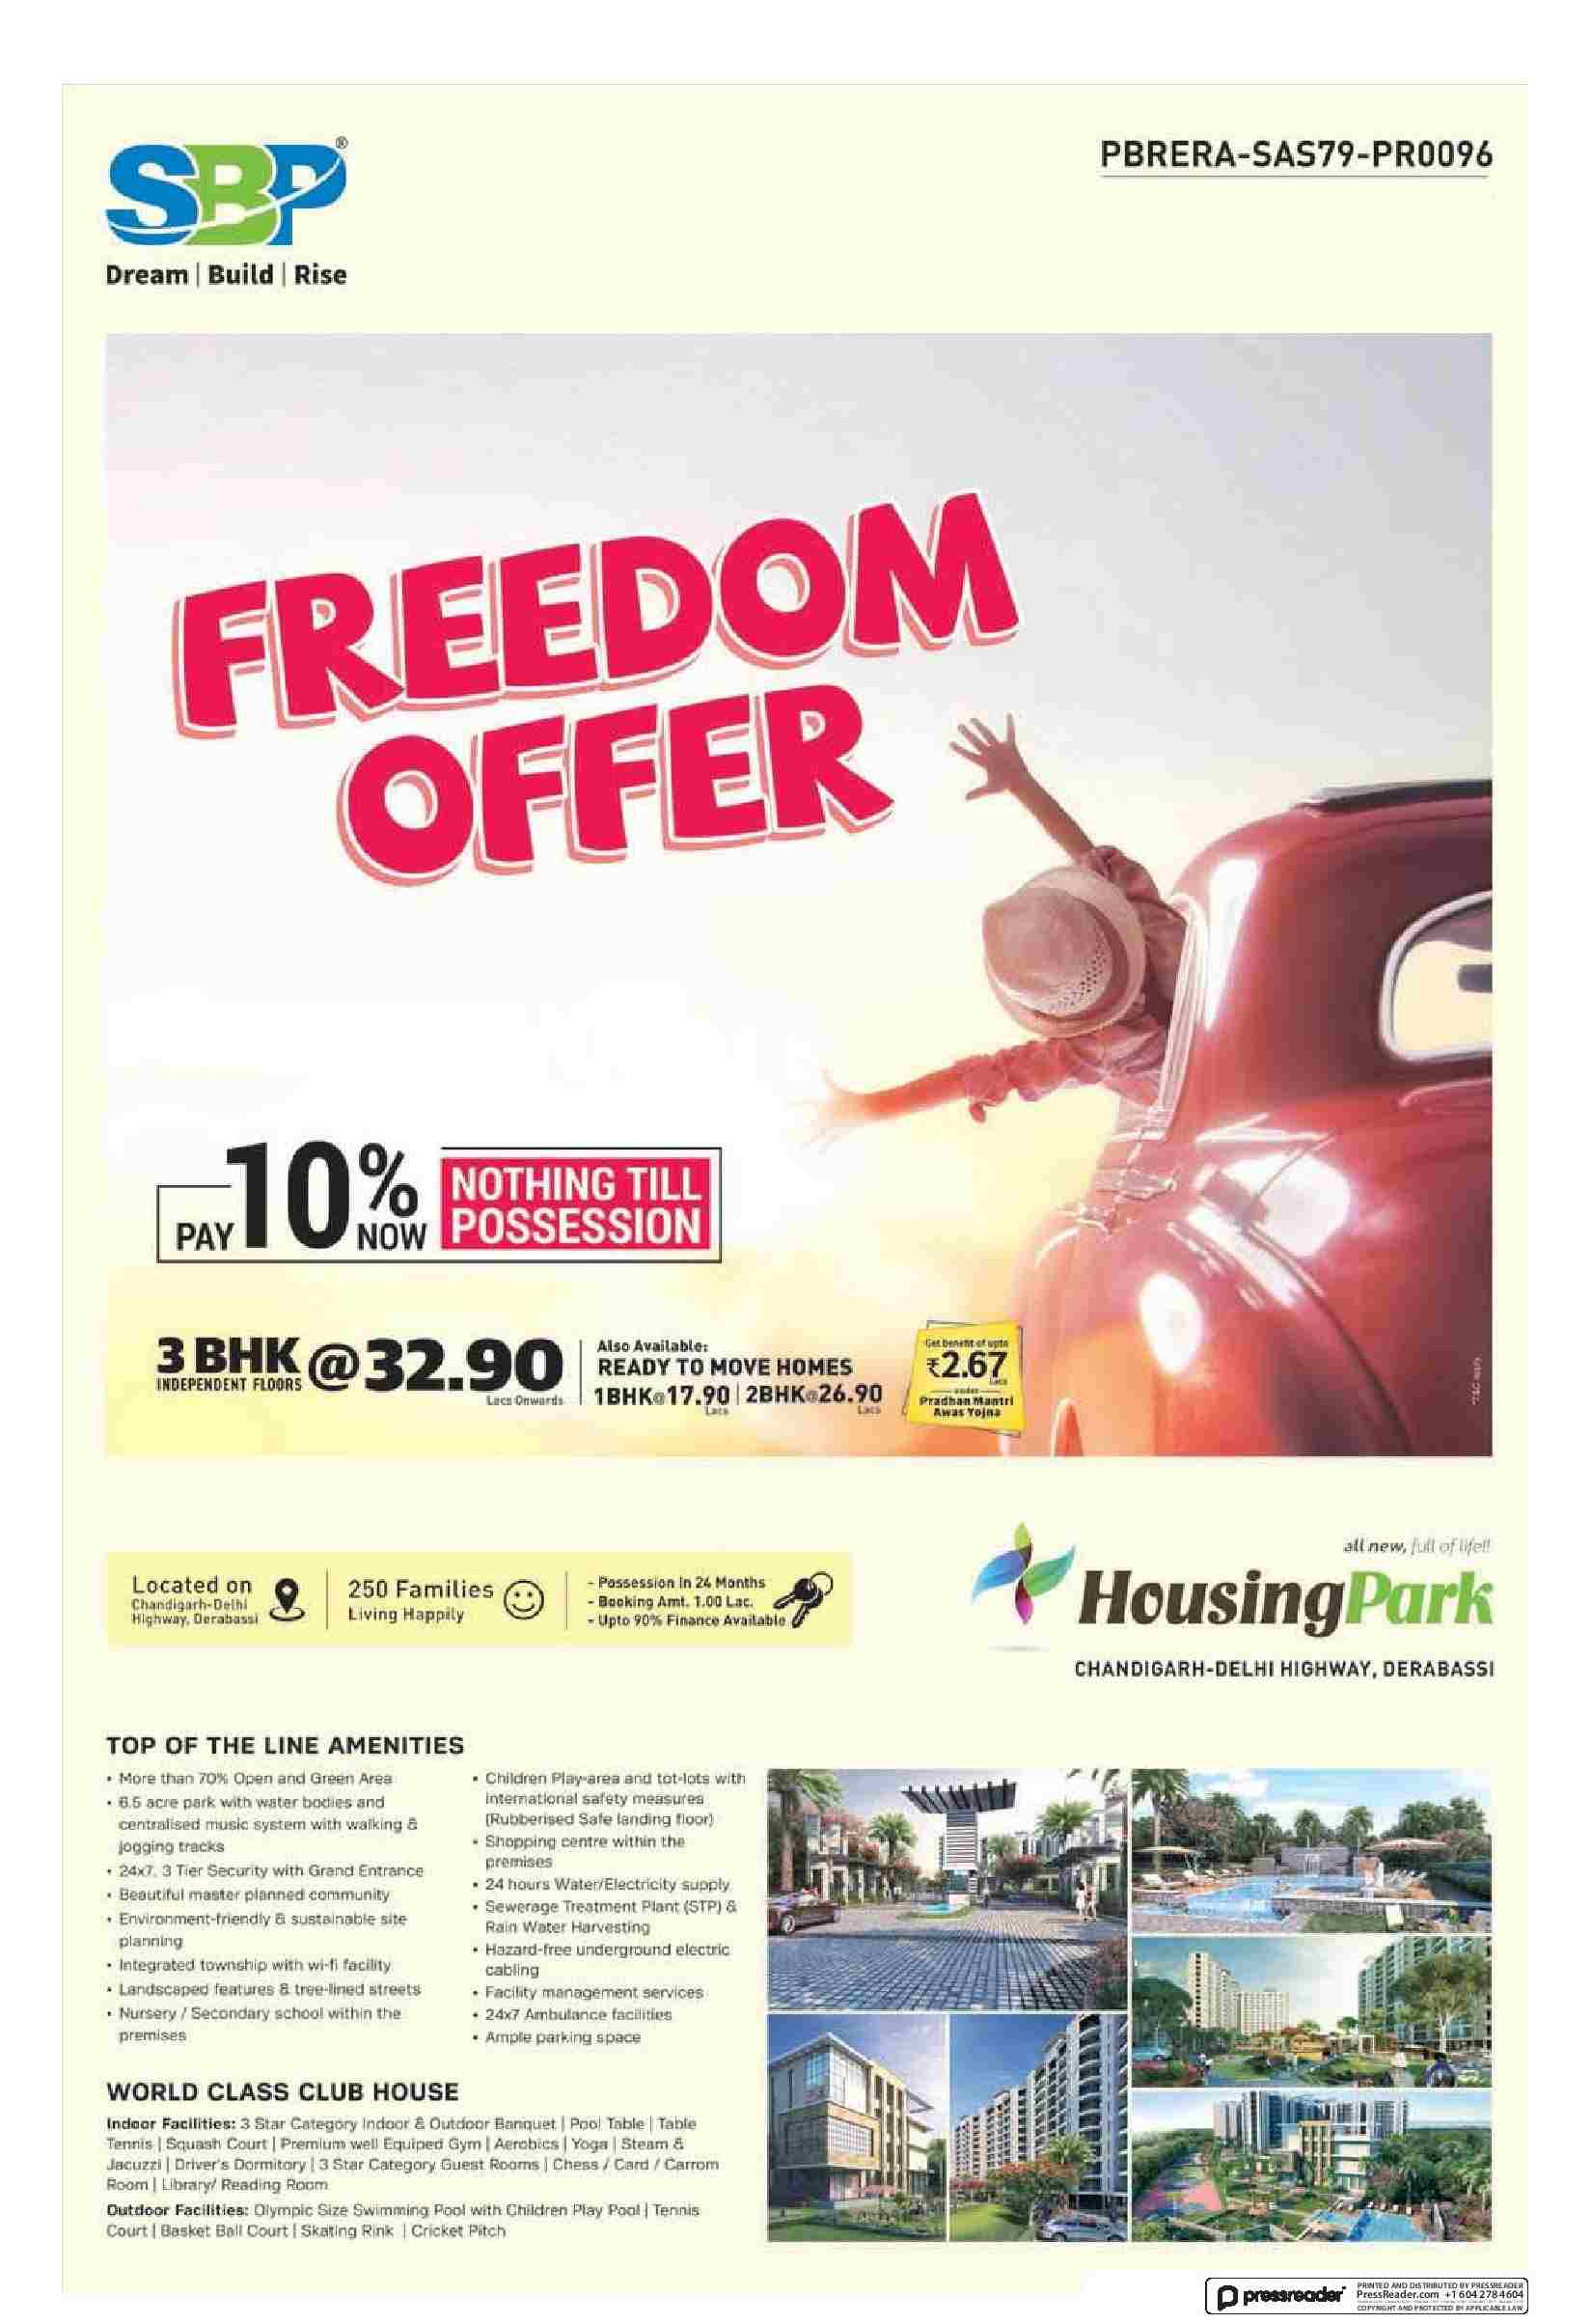 Pay 10% now and nothing till possession at SBP Housing Park in Chandigarh